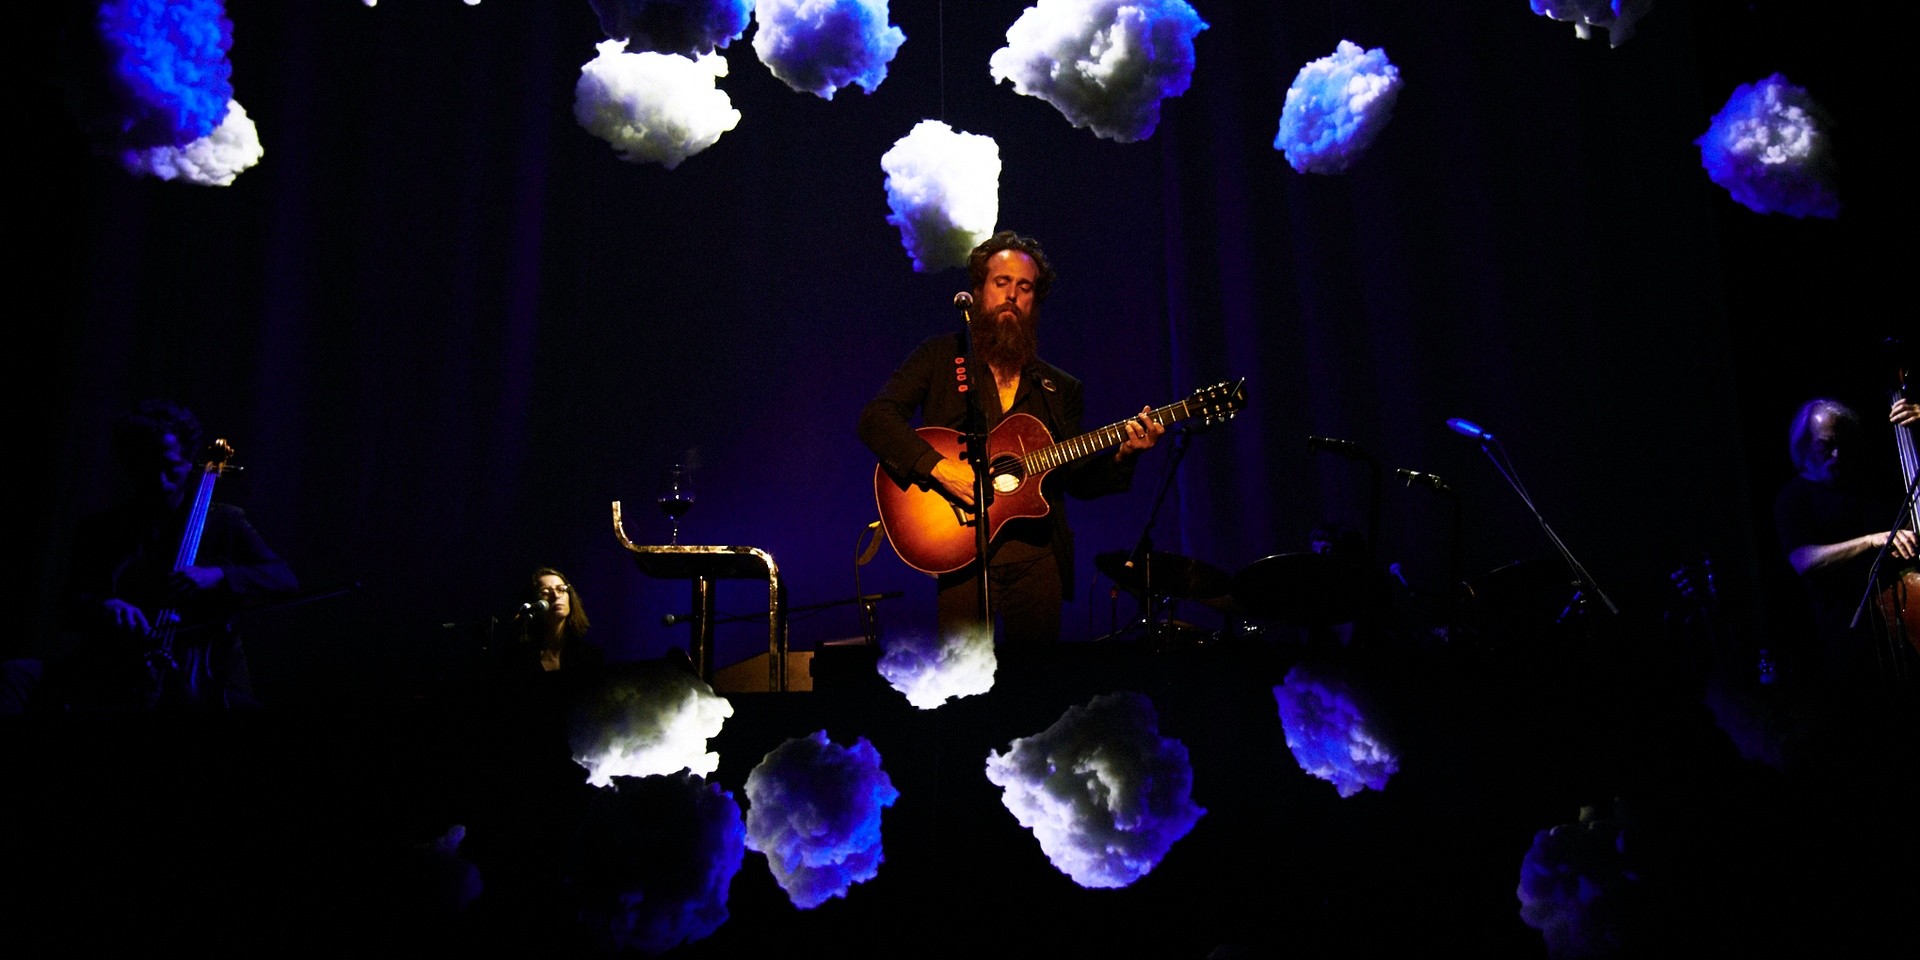 Iron & Wine intoxicates at Capitol Theatre – gig report